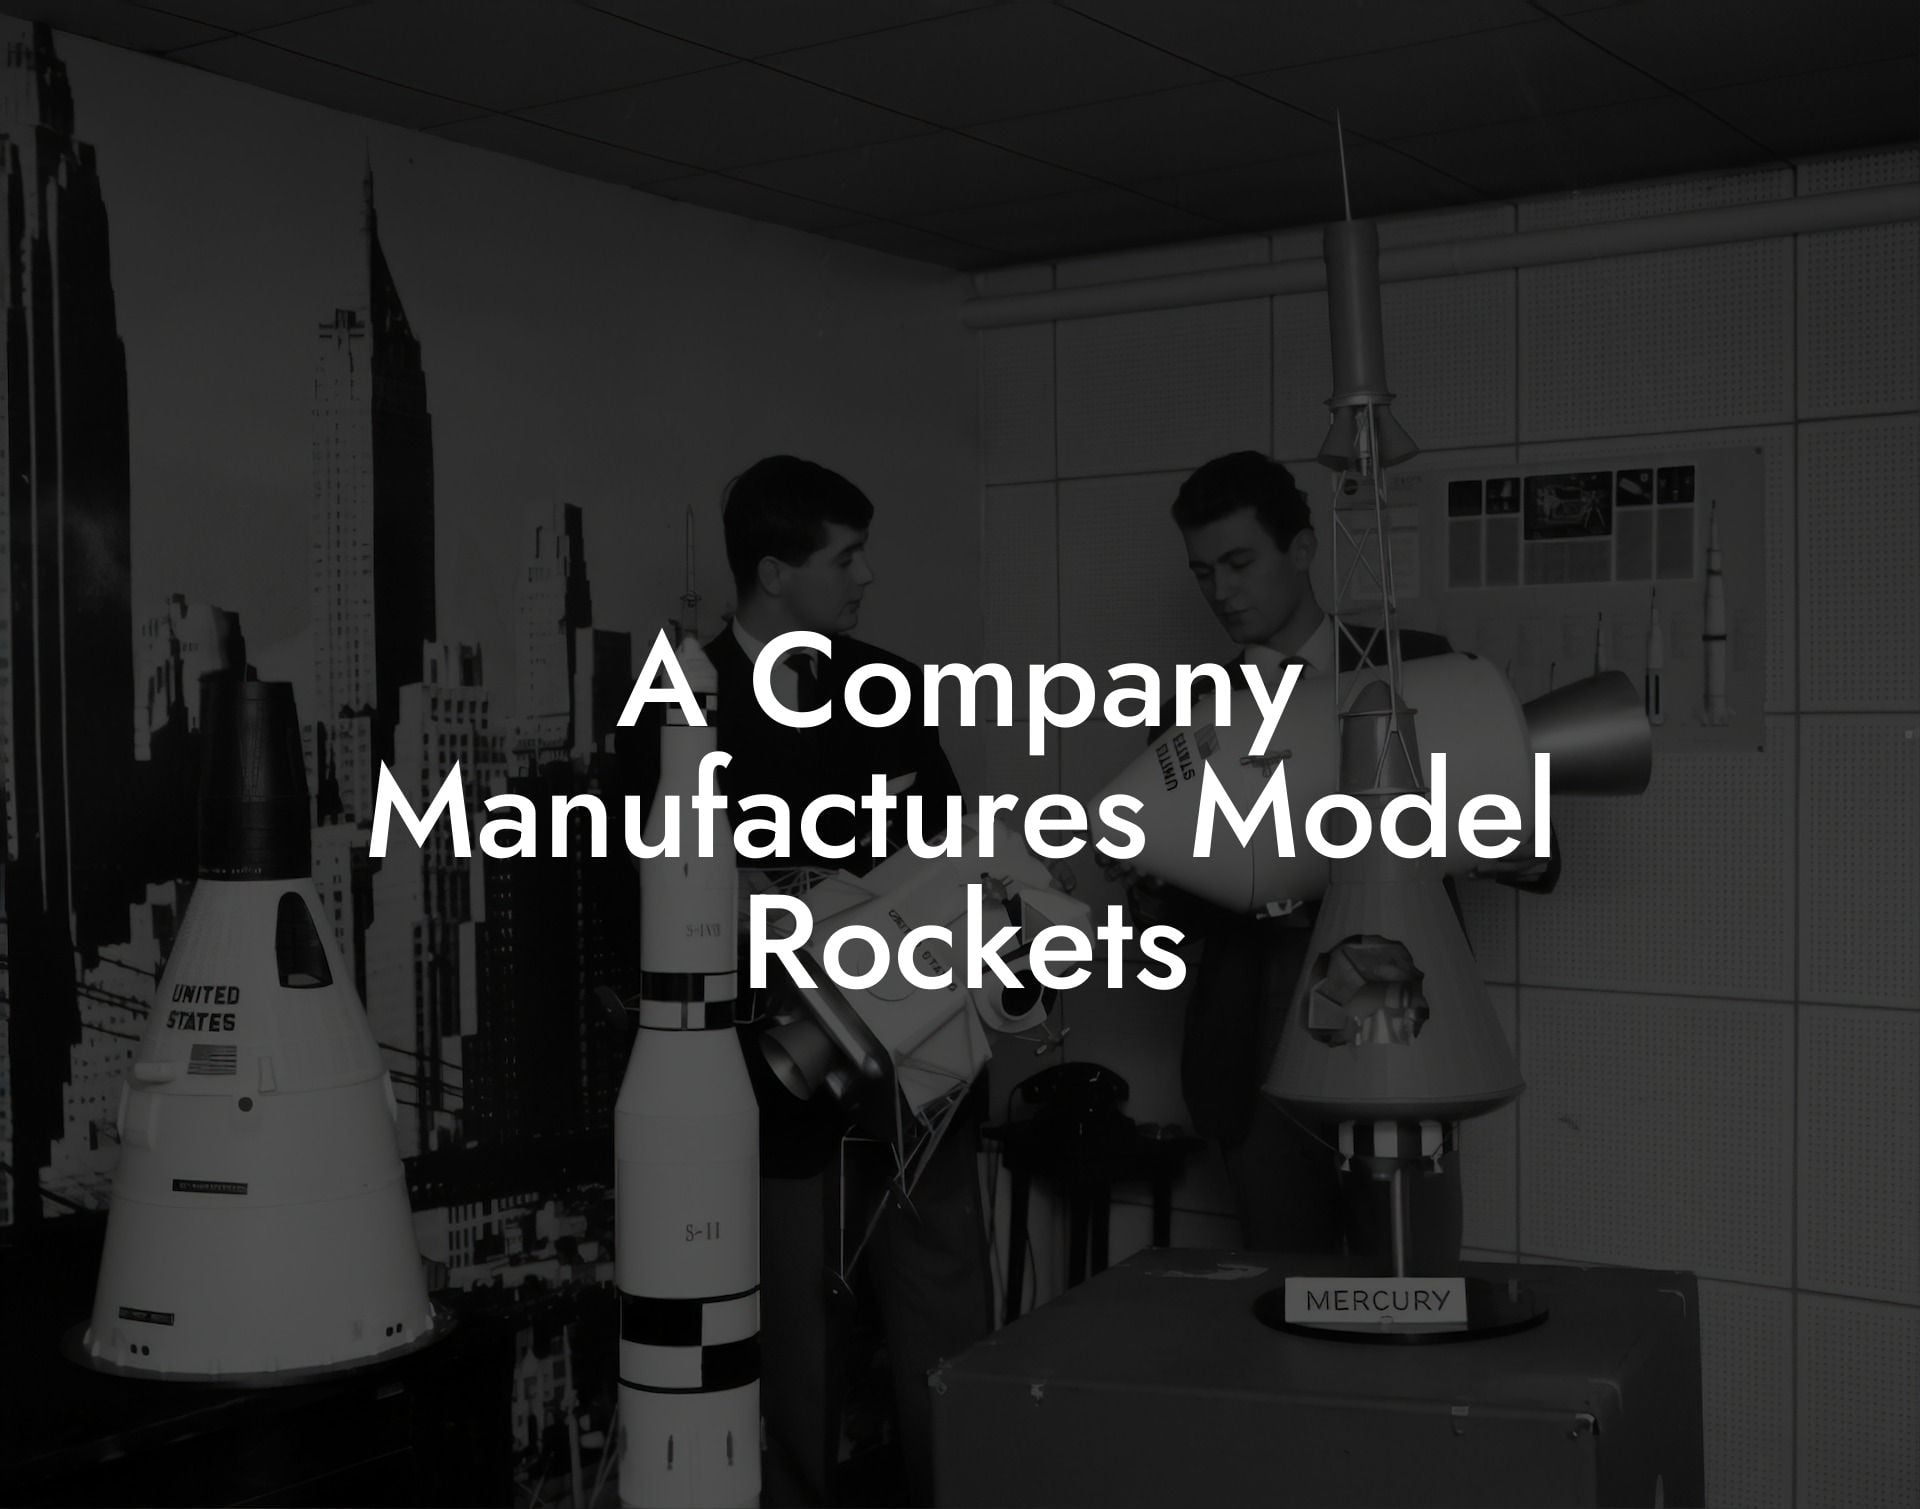 A Company Manufactures Model Rockets